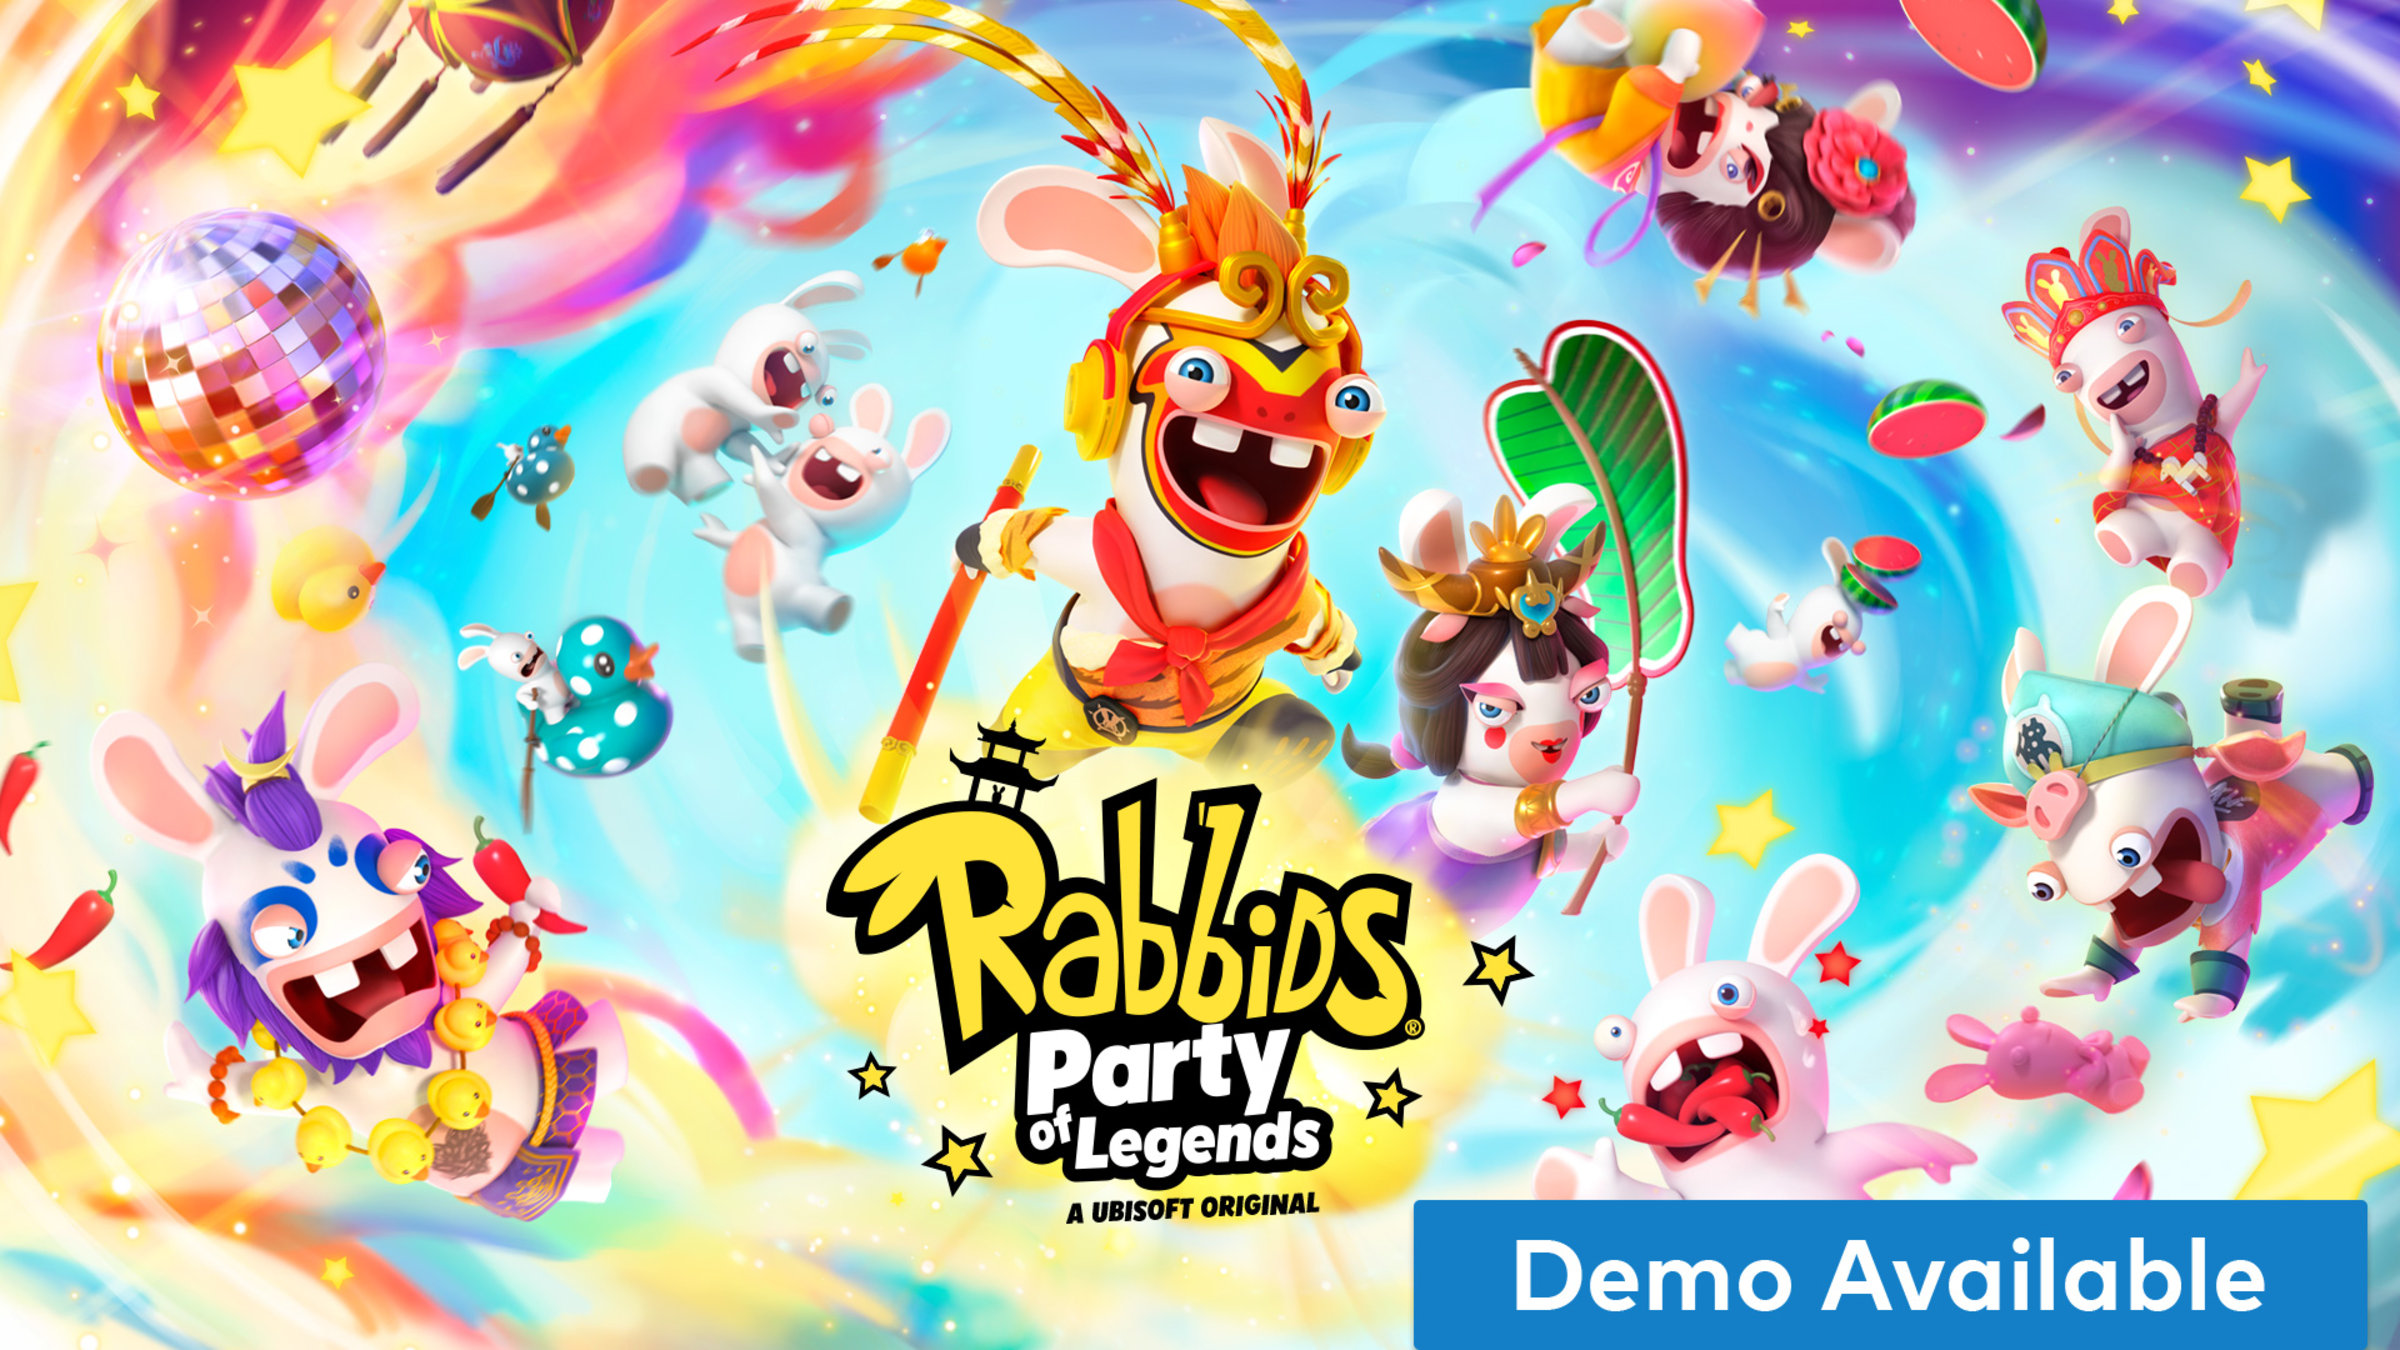 Rabbids®: - of Nintendo Switch Nintendo Official Legends Site for Party